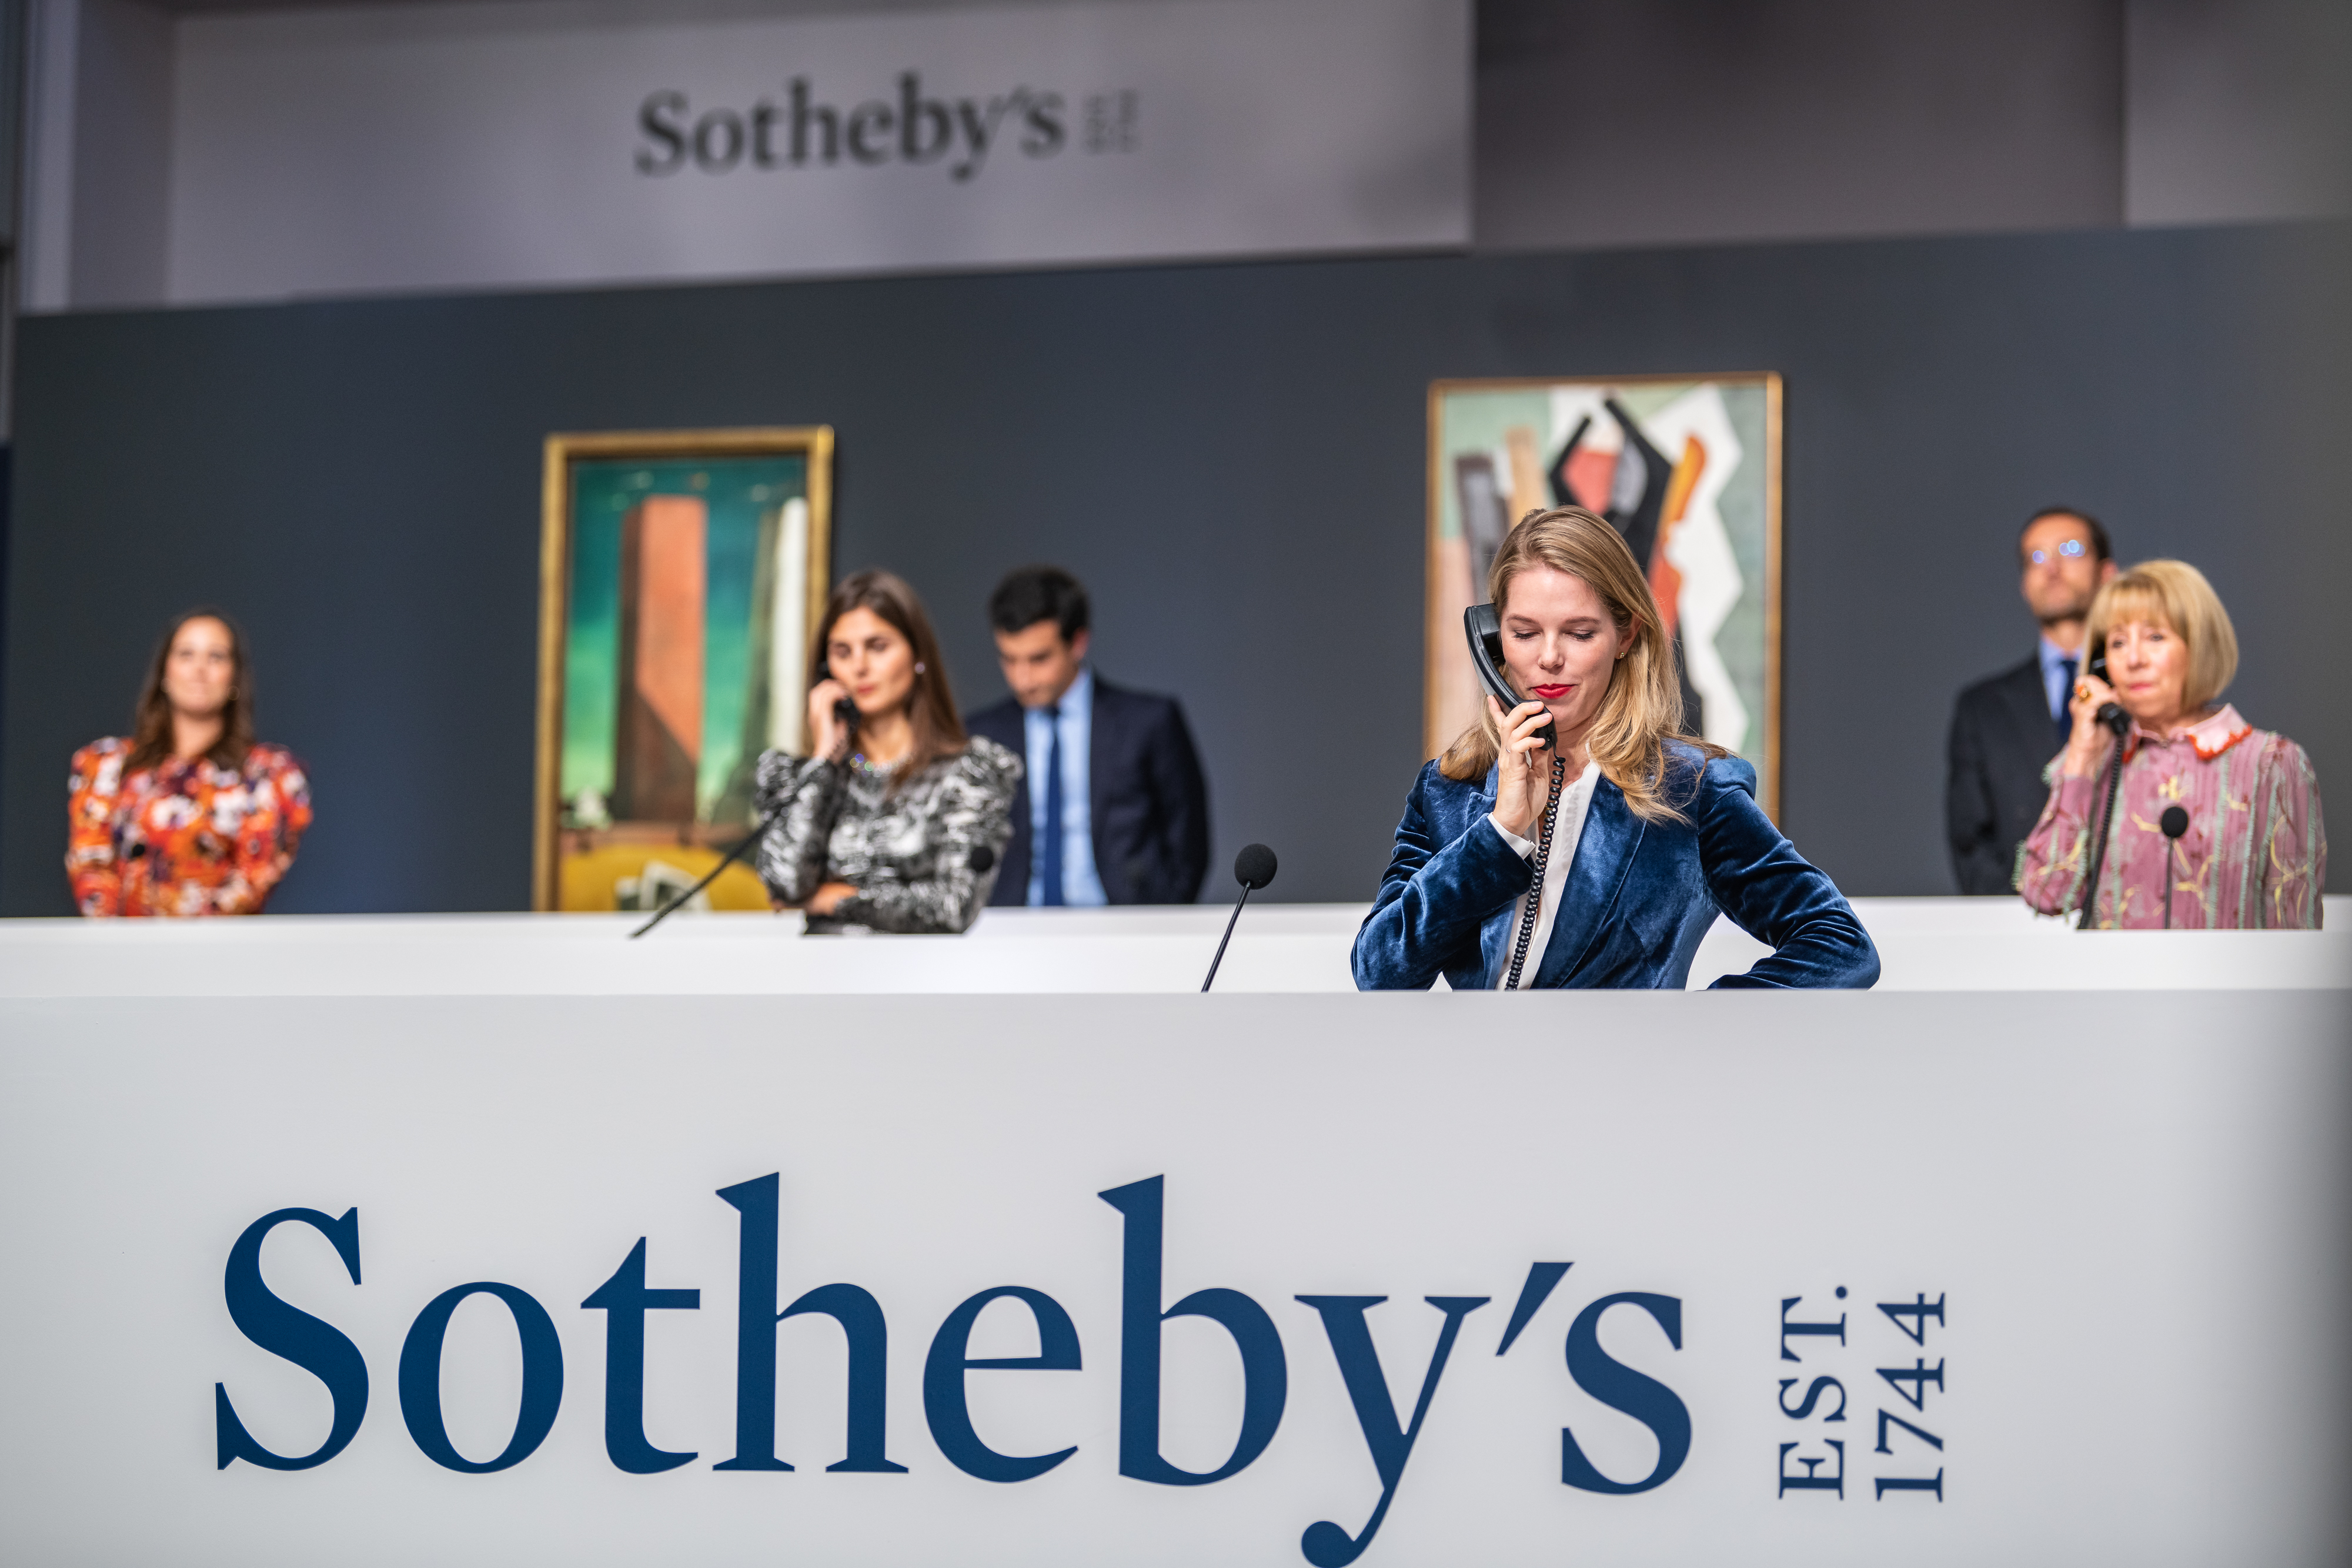 Top Auction Houses Saw Total Sales Drop in 2020—But Sotheby's Outpaced  Rival Christie's With $5 Billion in Revenue